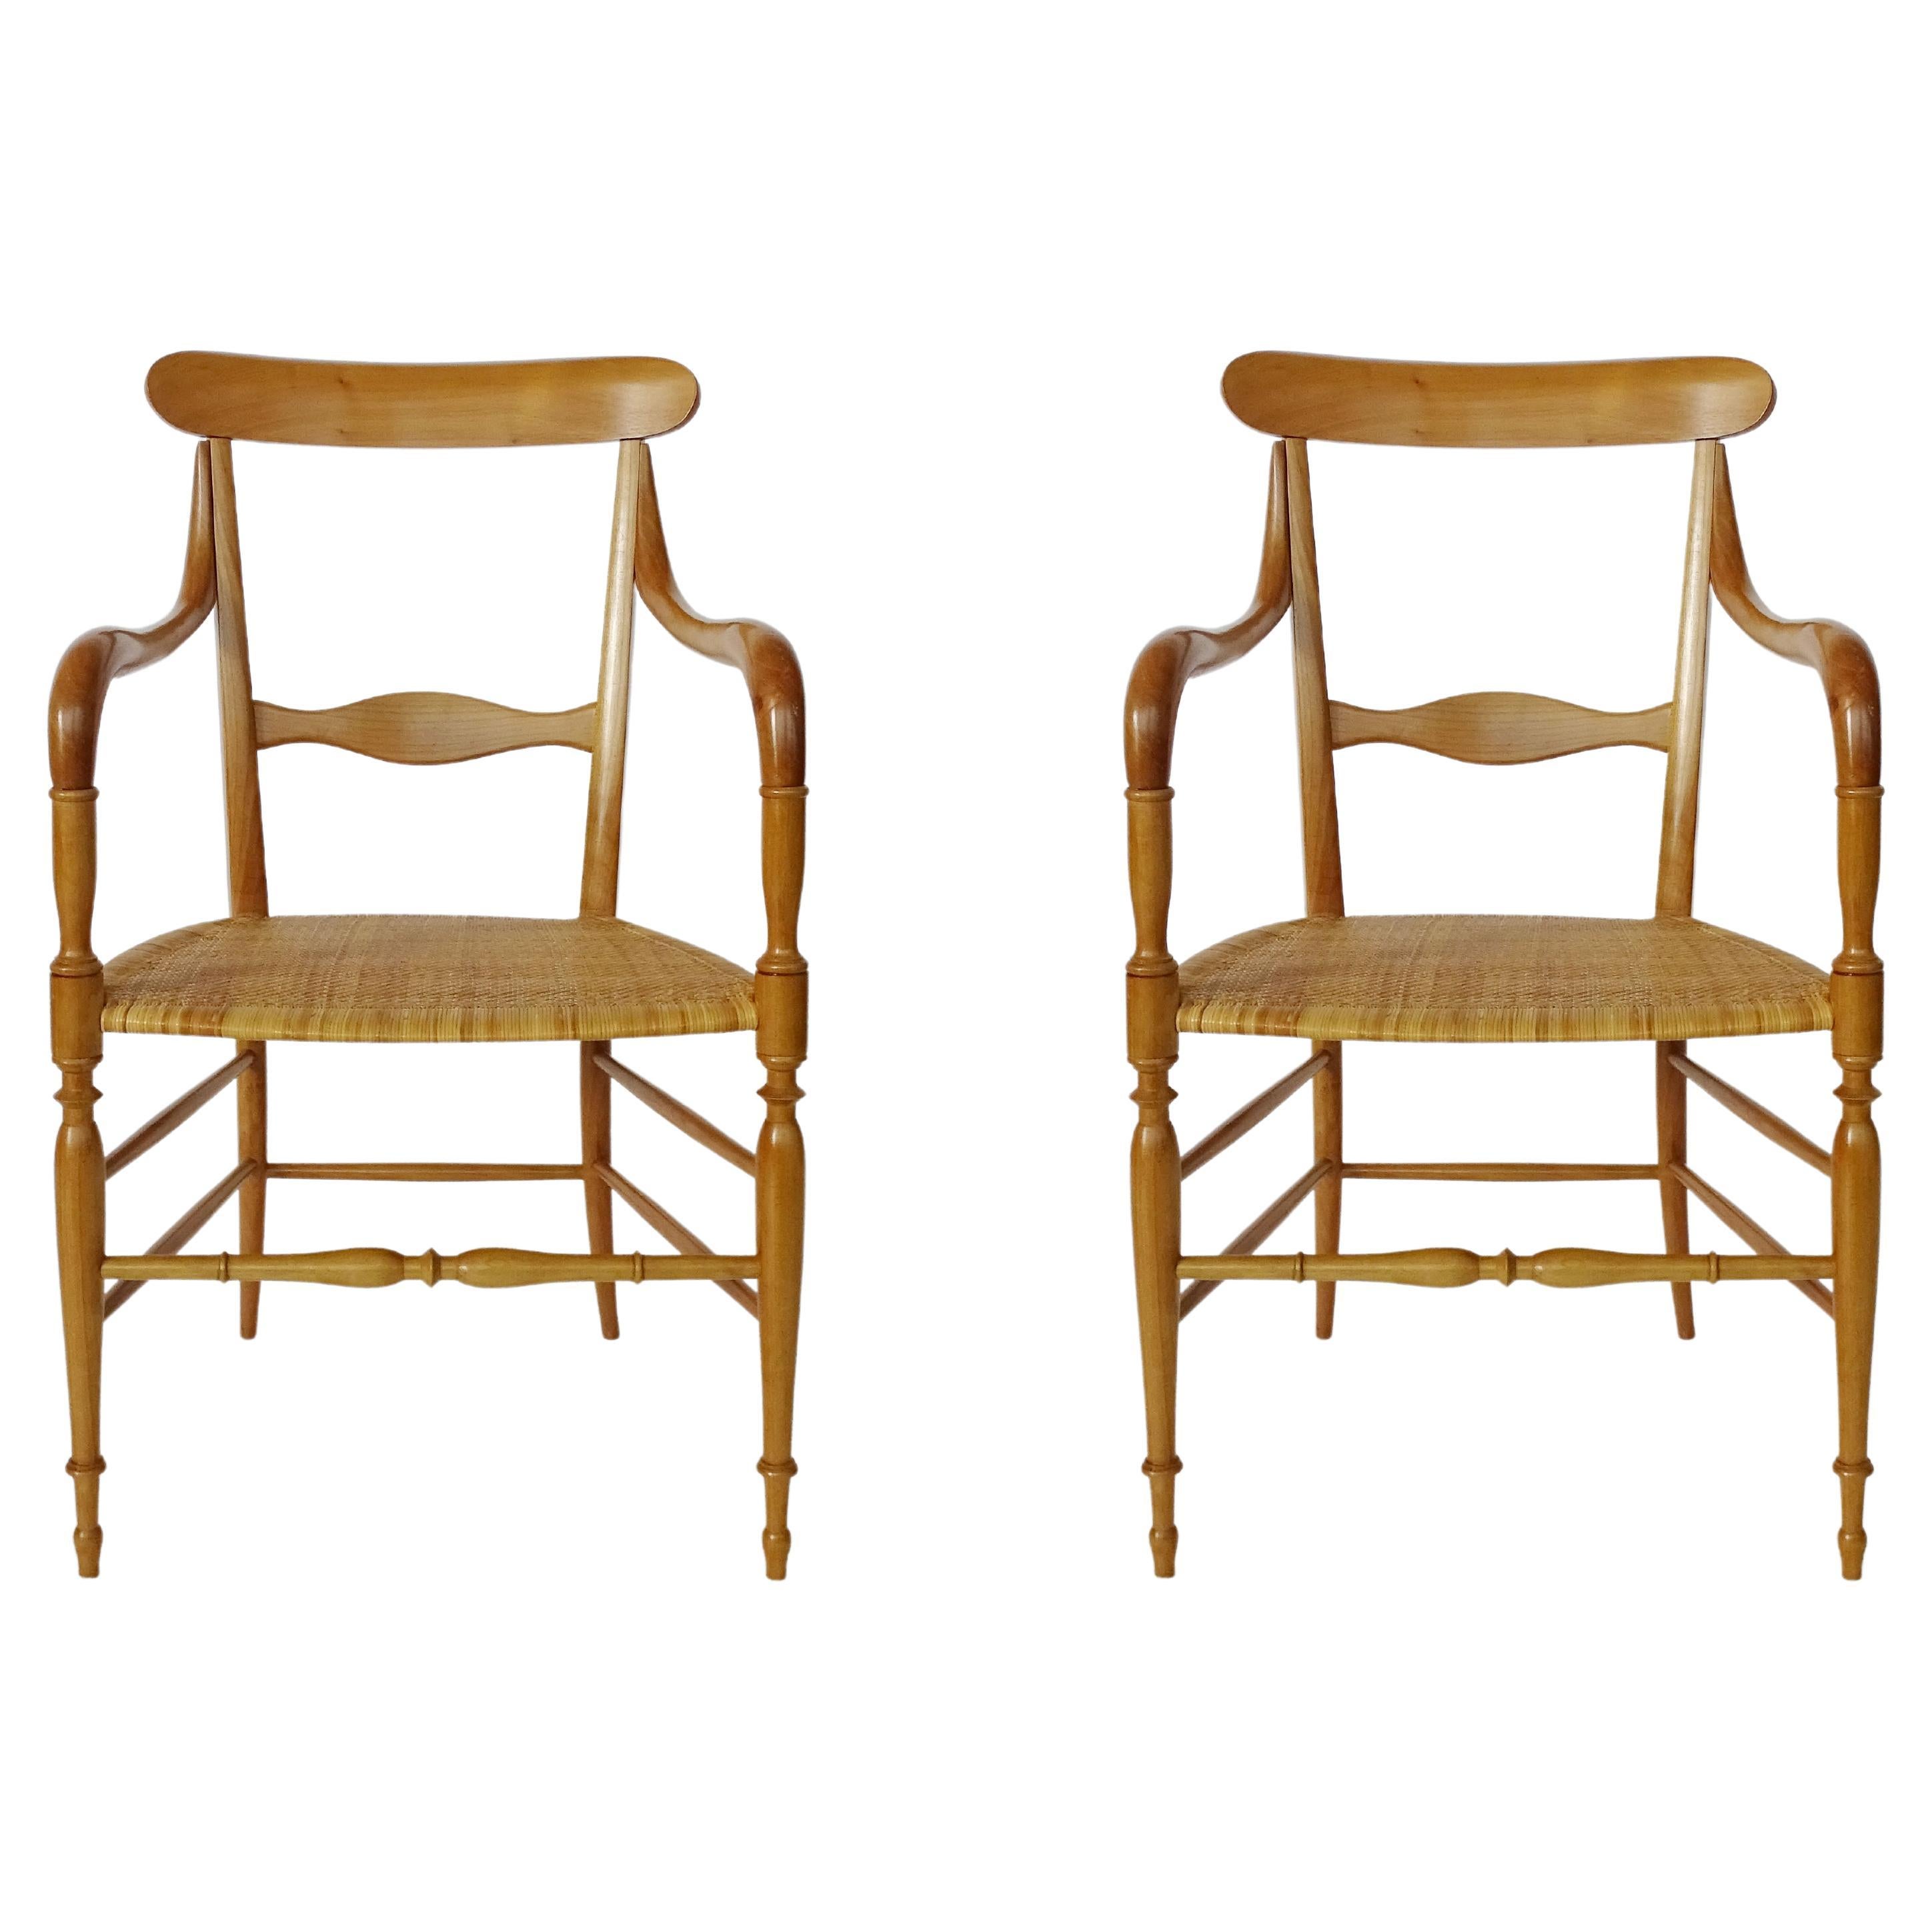 Pair of Chiavari Armchairs in Beechwood and Caned Seat, Italy, 1960s